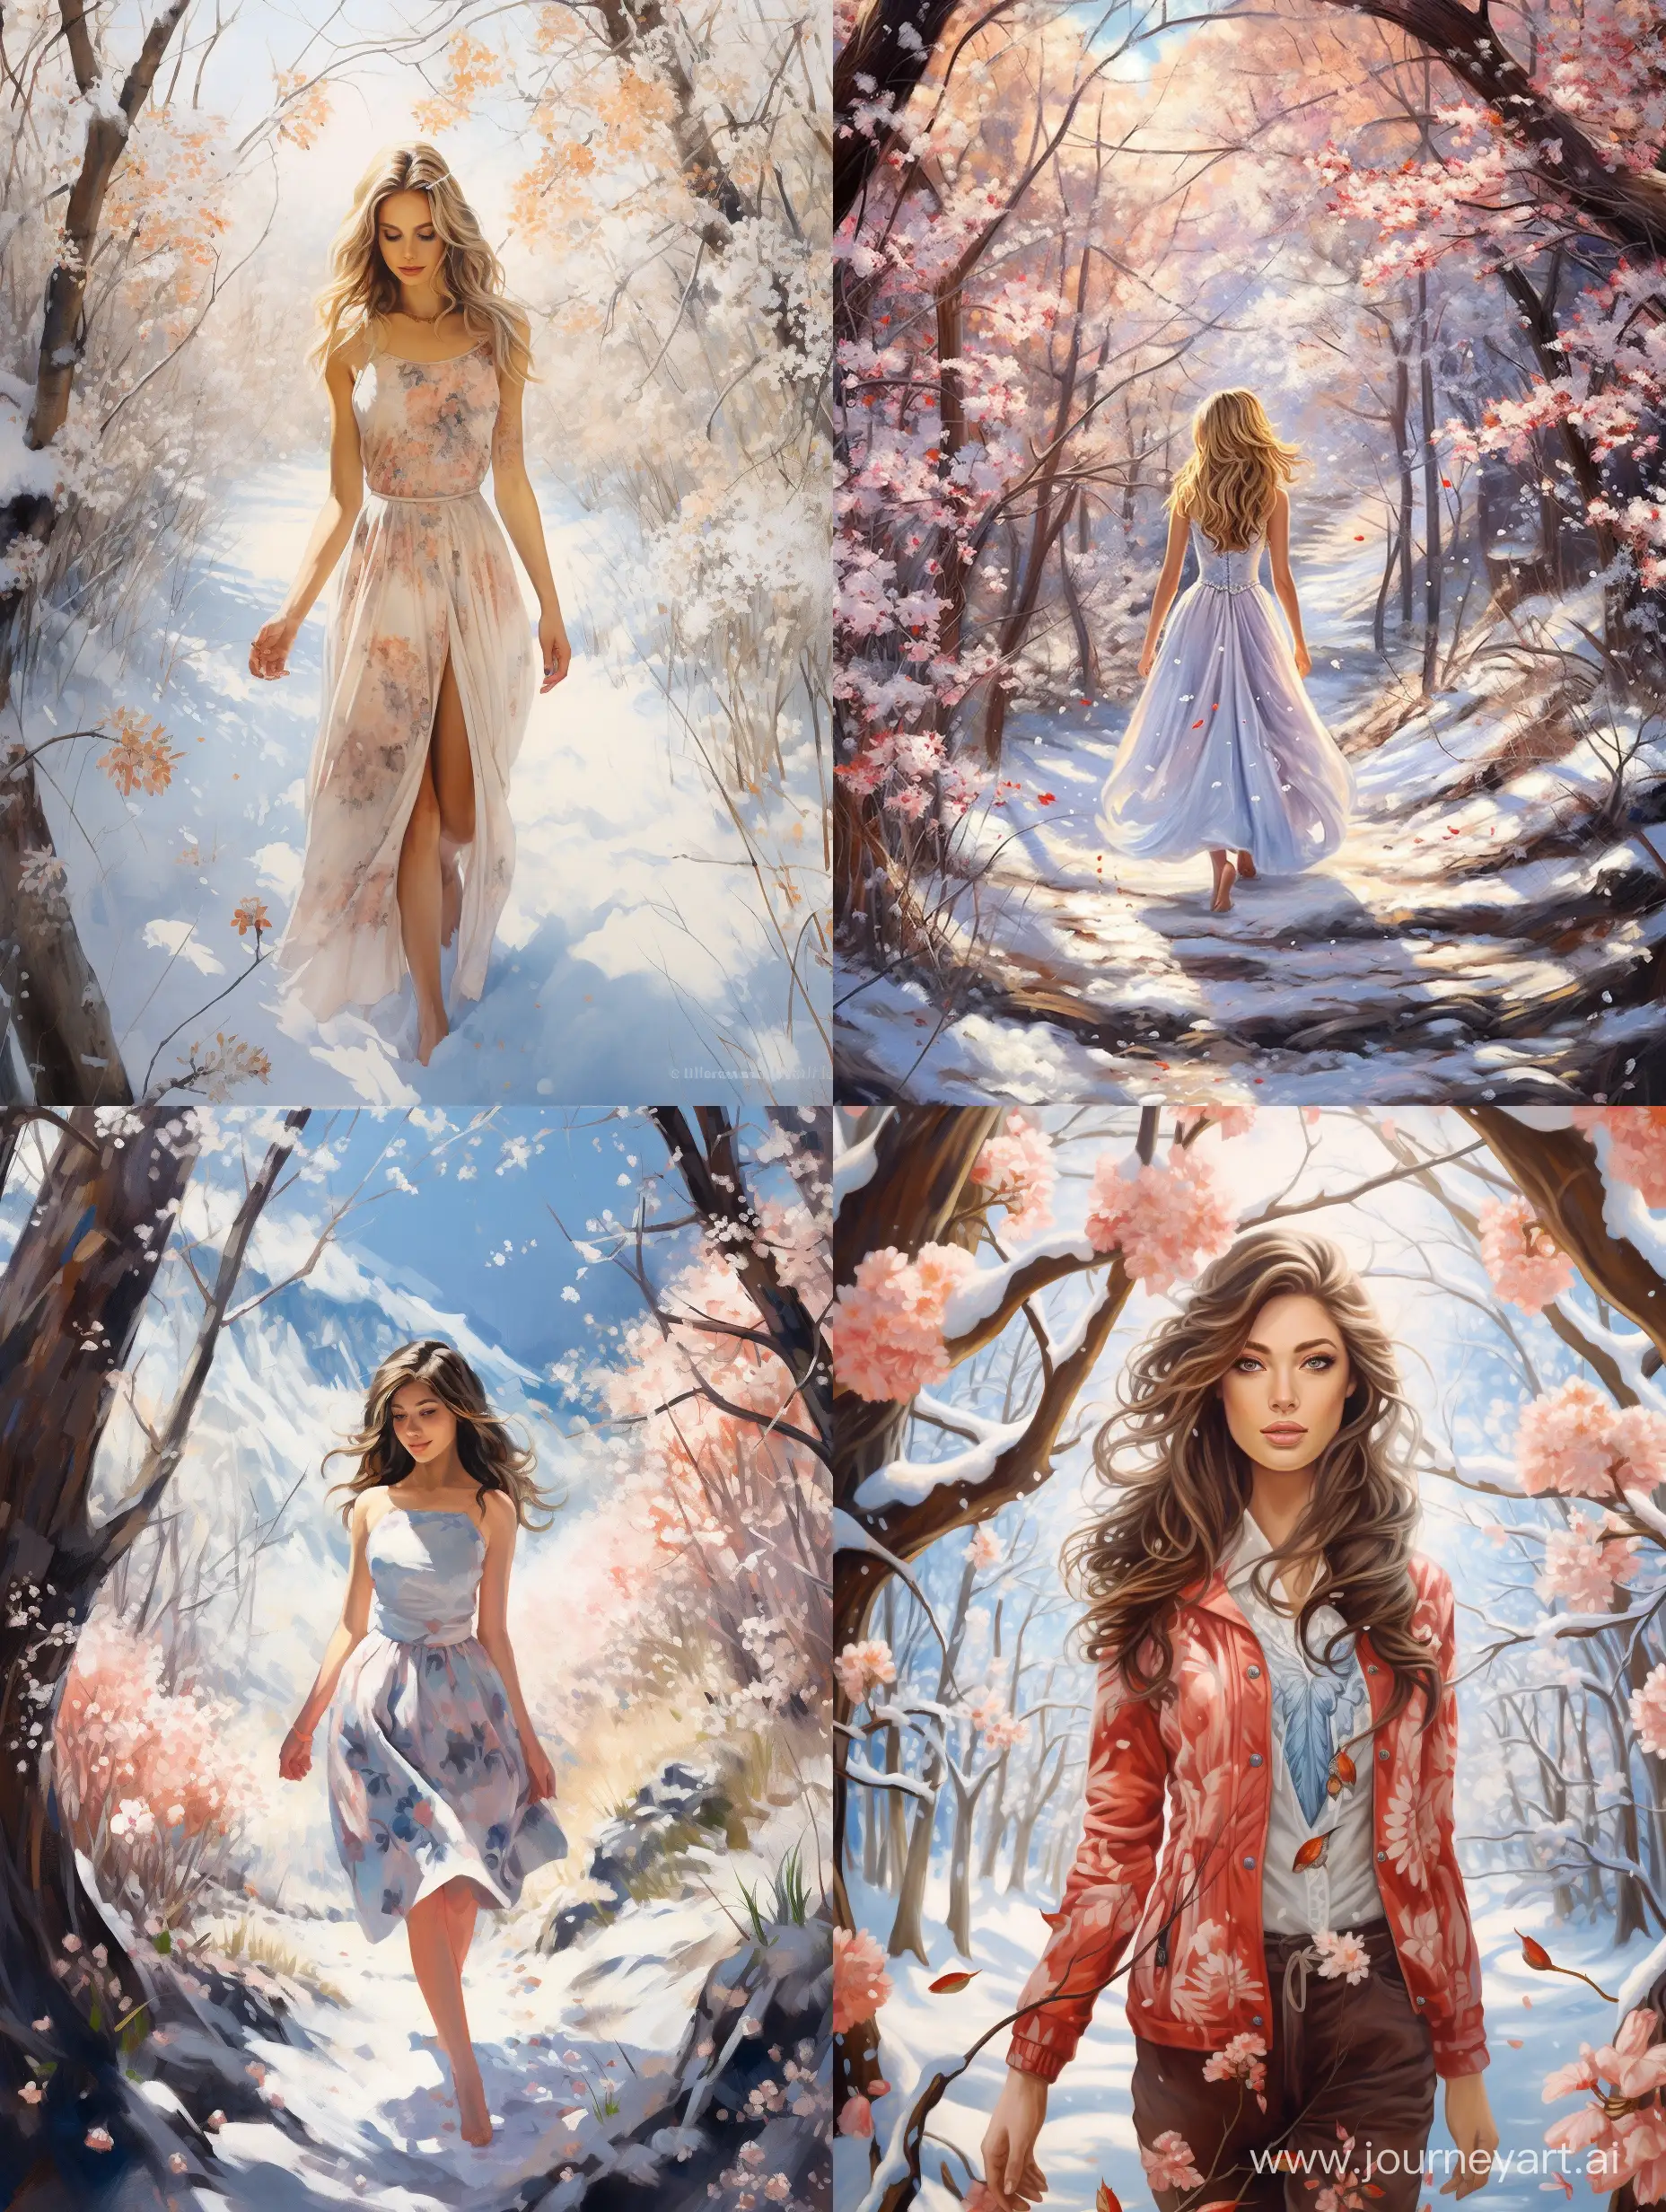 A beautiful girl is walking through a winter forest on a bright sunny day, with blossoms blooming all around.